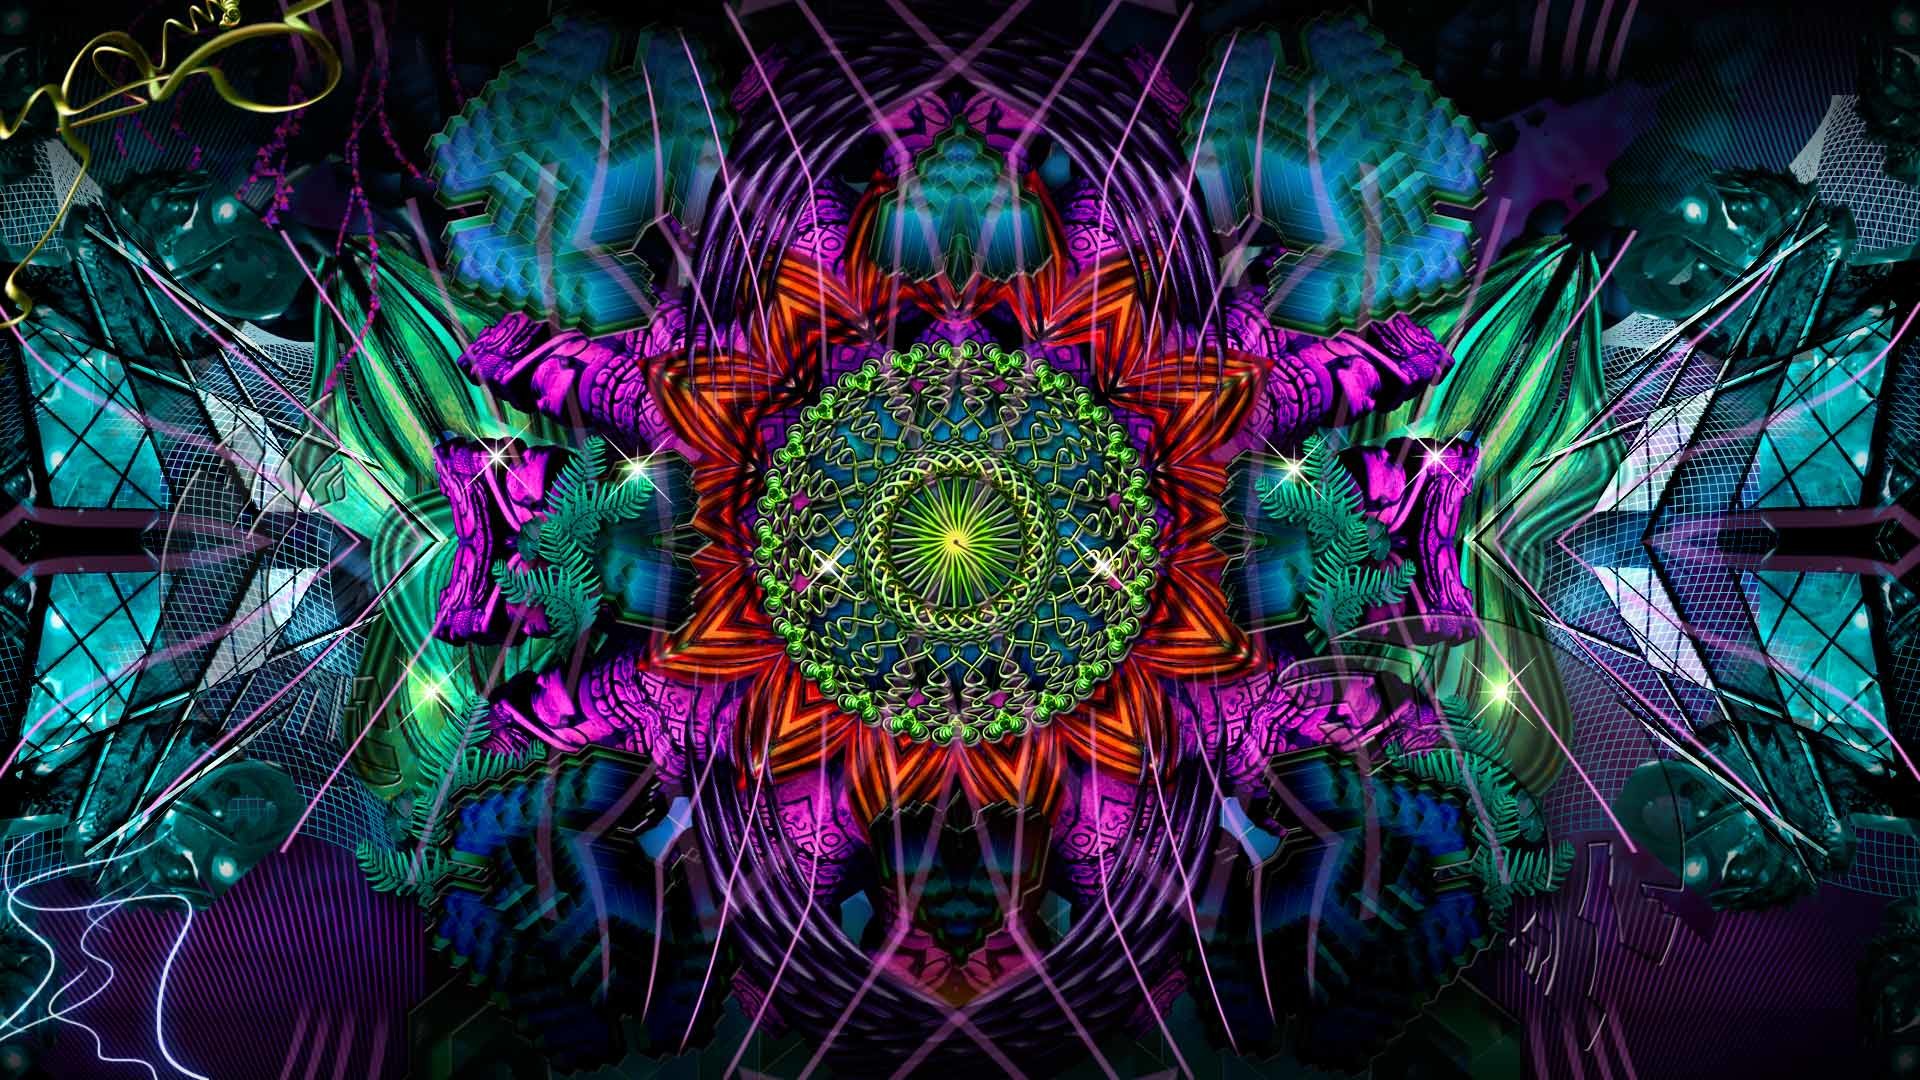 1920x1080 Psychedelic Peace Photo Wallpaper HD - dlwallhd.